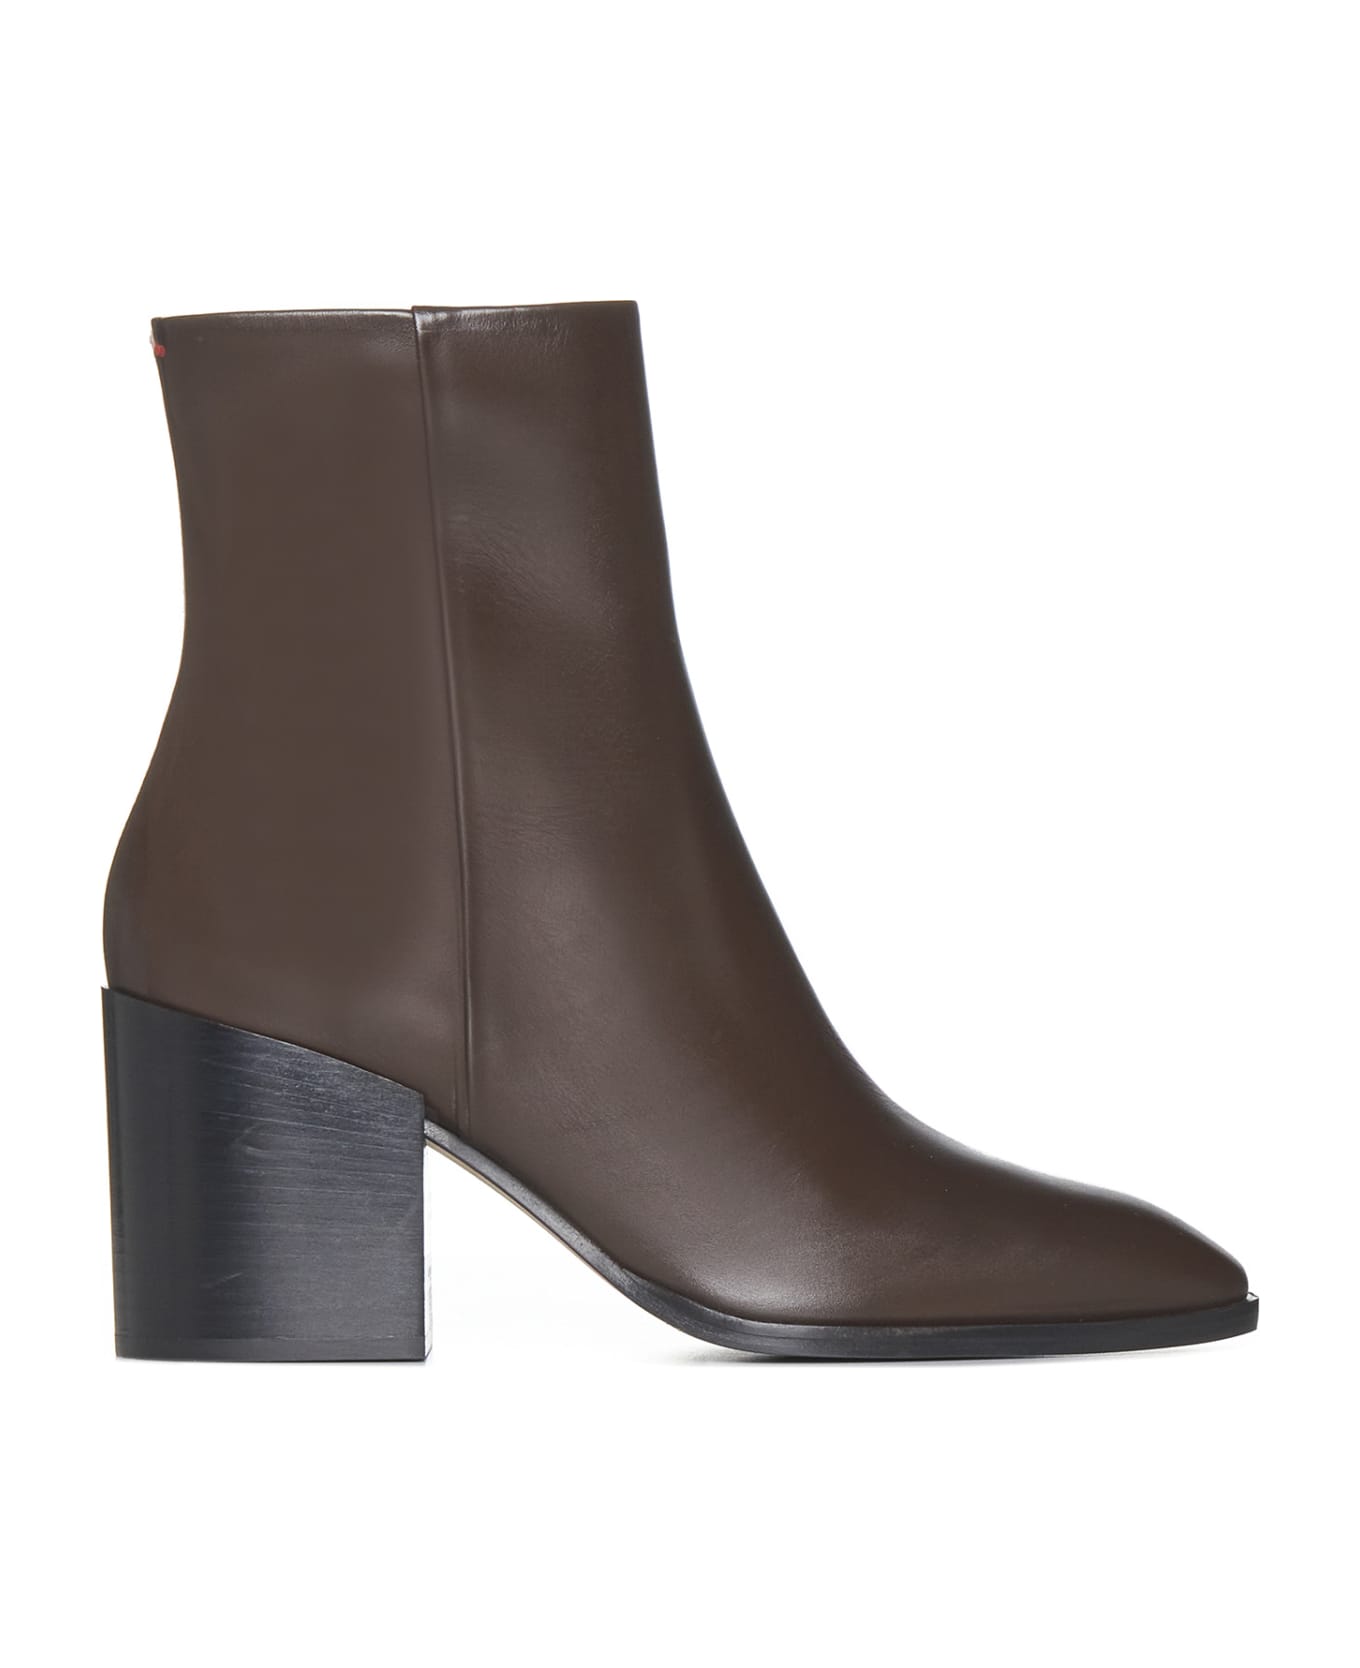 aeyde Boots - Brown